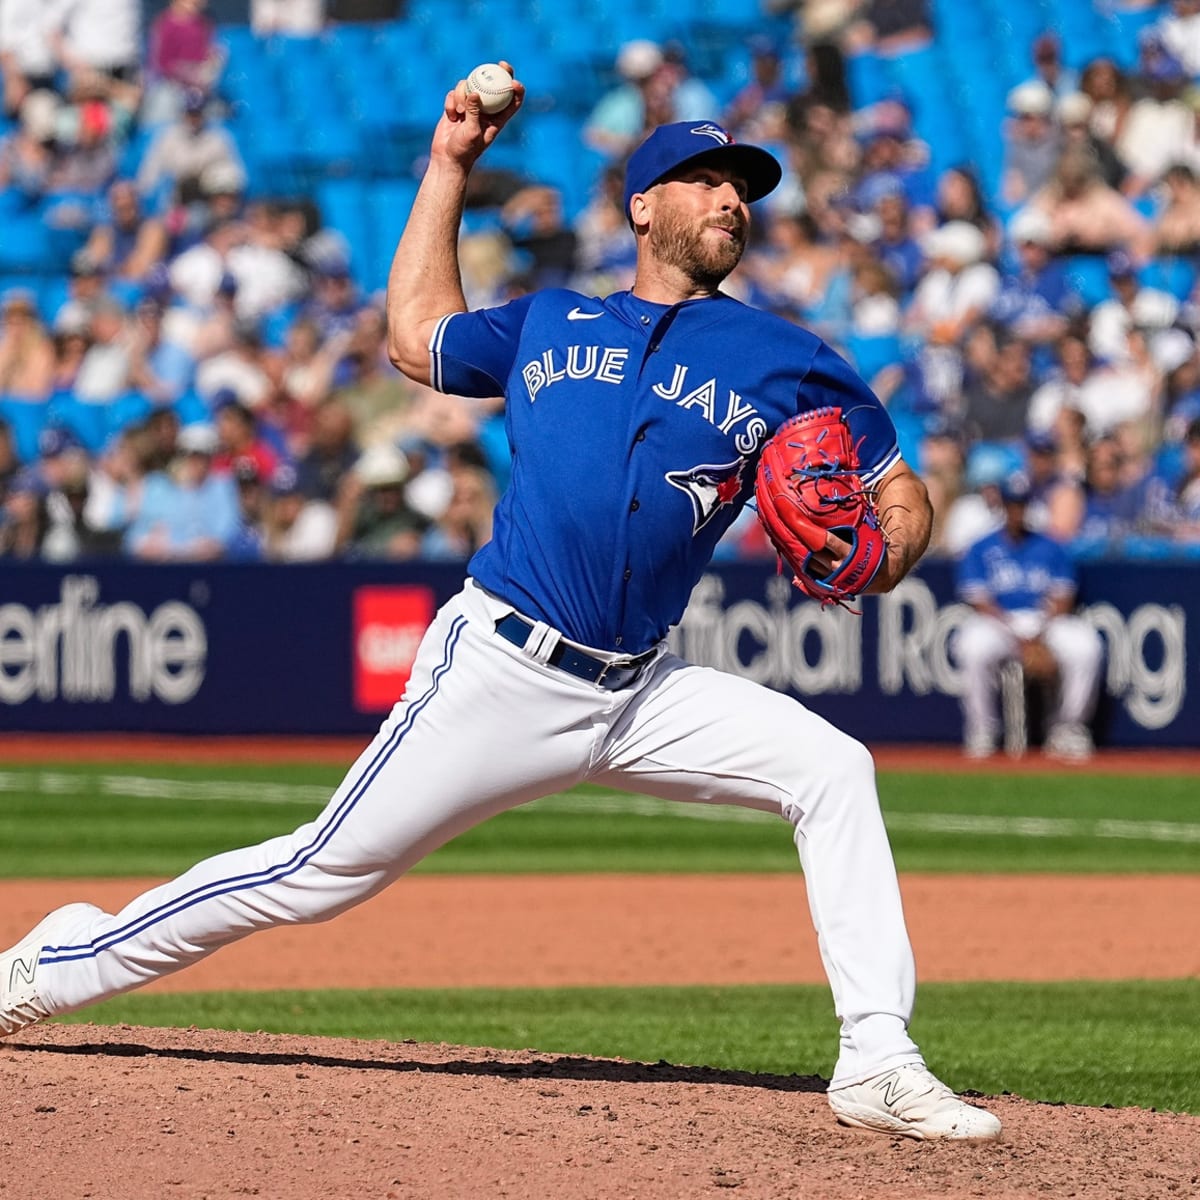 Blue Jays Anthony Bass to catch ceremonial first pitch on Pride Weekend